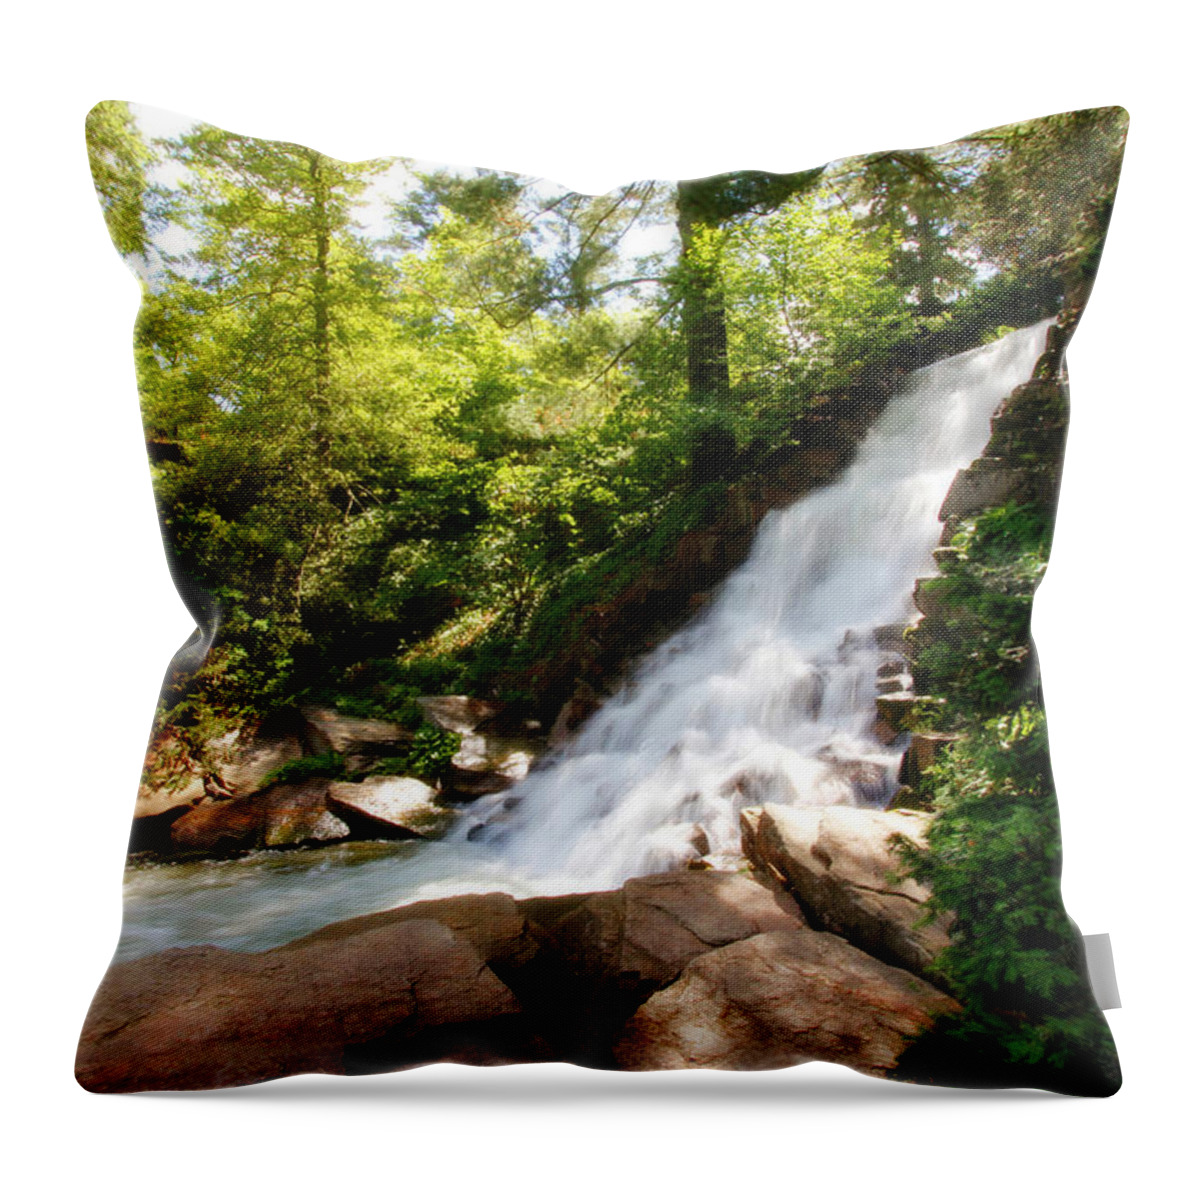 Waterfalls Throw Pillow featuring the photograph Waterfall at Longwood Gardens by Trina Ansel